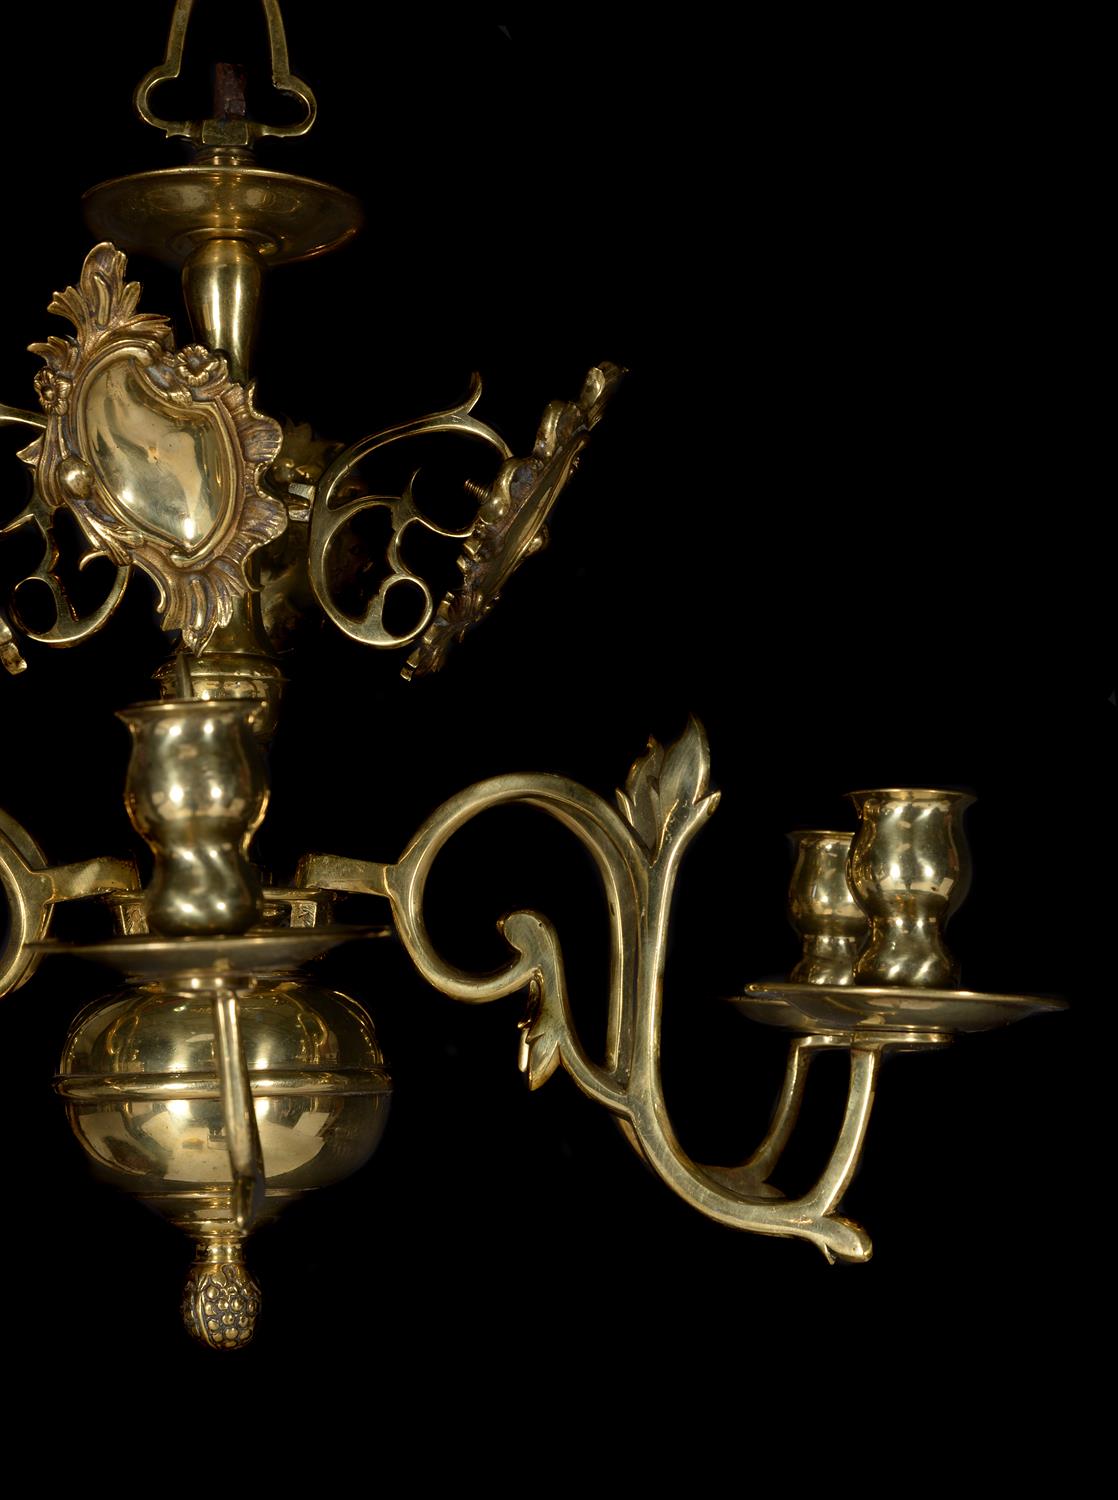 A Dutch or English brass six-light chandelier - Image 2 of 2